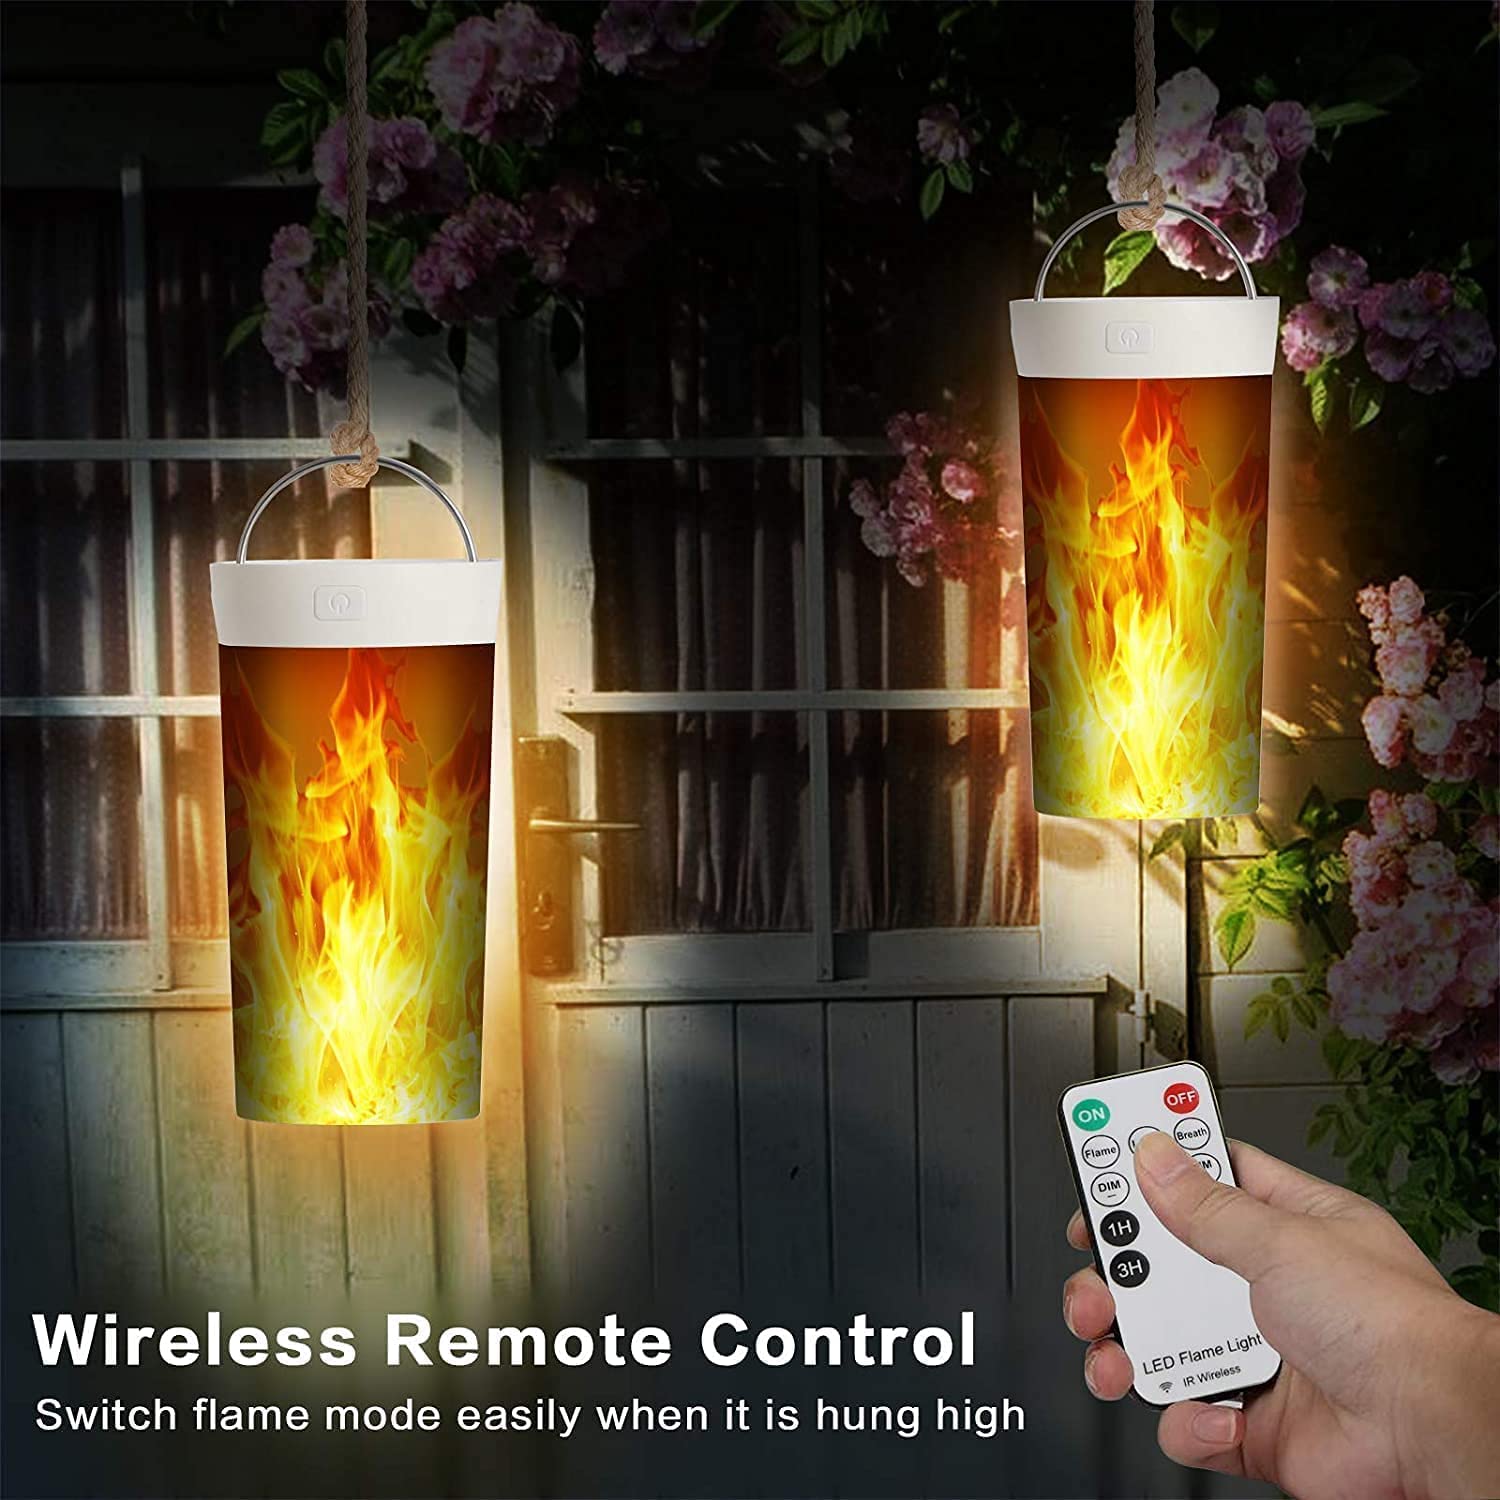 LED Flame Lights, Battery Operated Flameless Candles, Flickering Fake Fire Lamps with Remote Control and Timer, Waterproof Outdoor Flame Lights with Gravity Sensing for Fireplace/Party/Garden/Bar - image 3 of 8